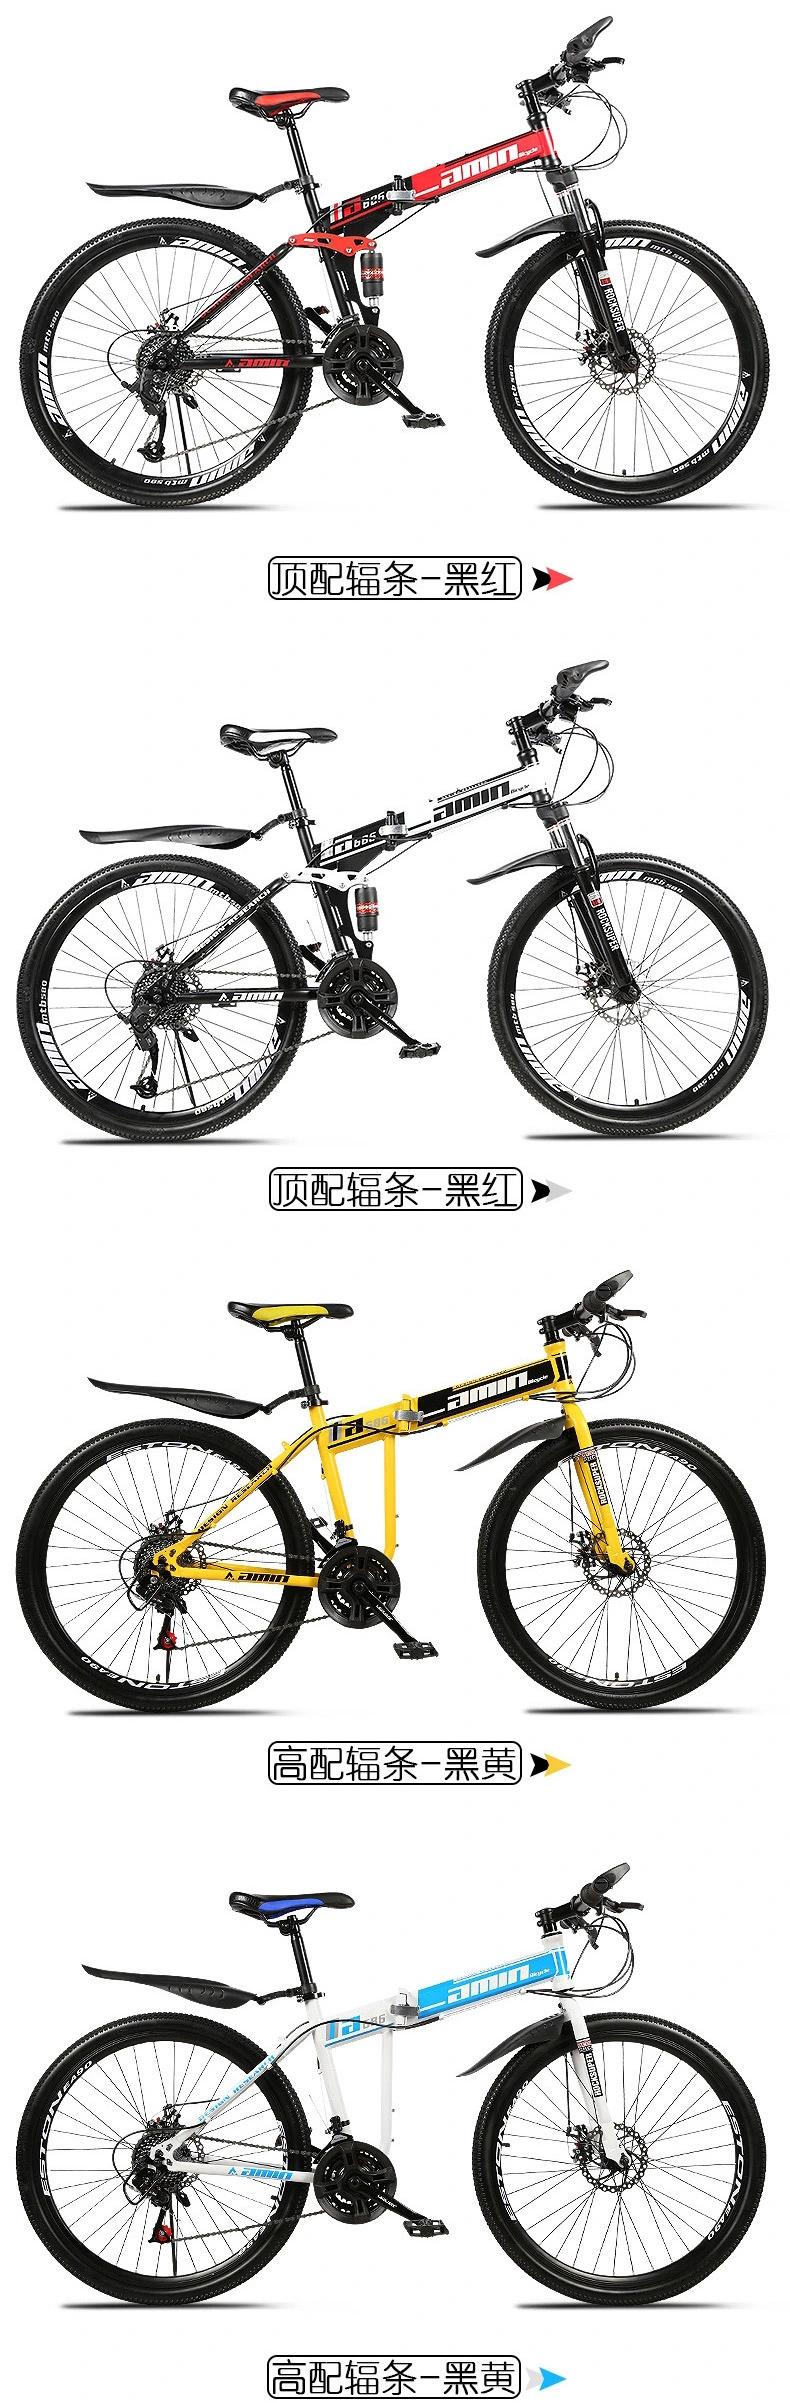 The First Choice for Sports Enthusiasts, High-Intensity Multifunctional Foldable Mountain Bikes, Urban Leisure Sports Bikes